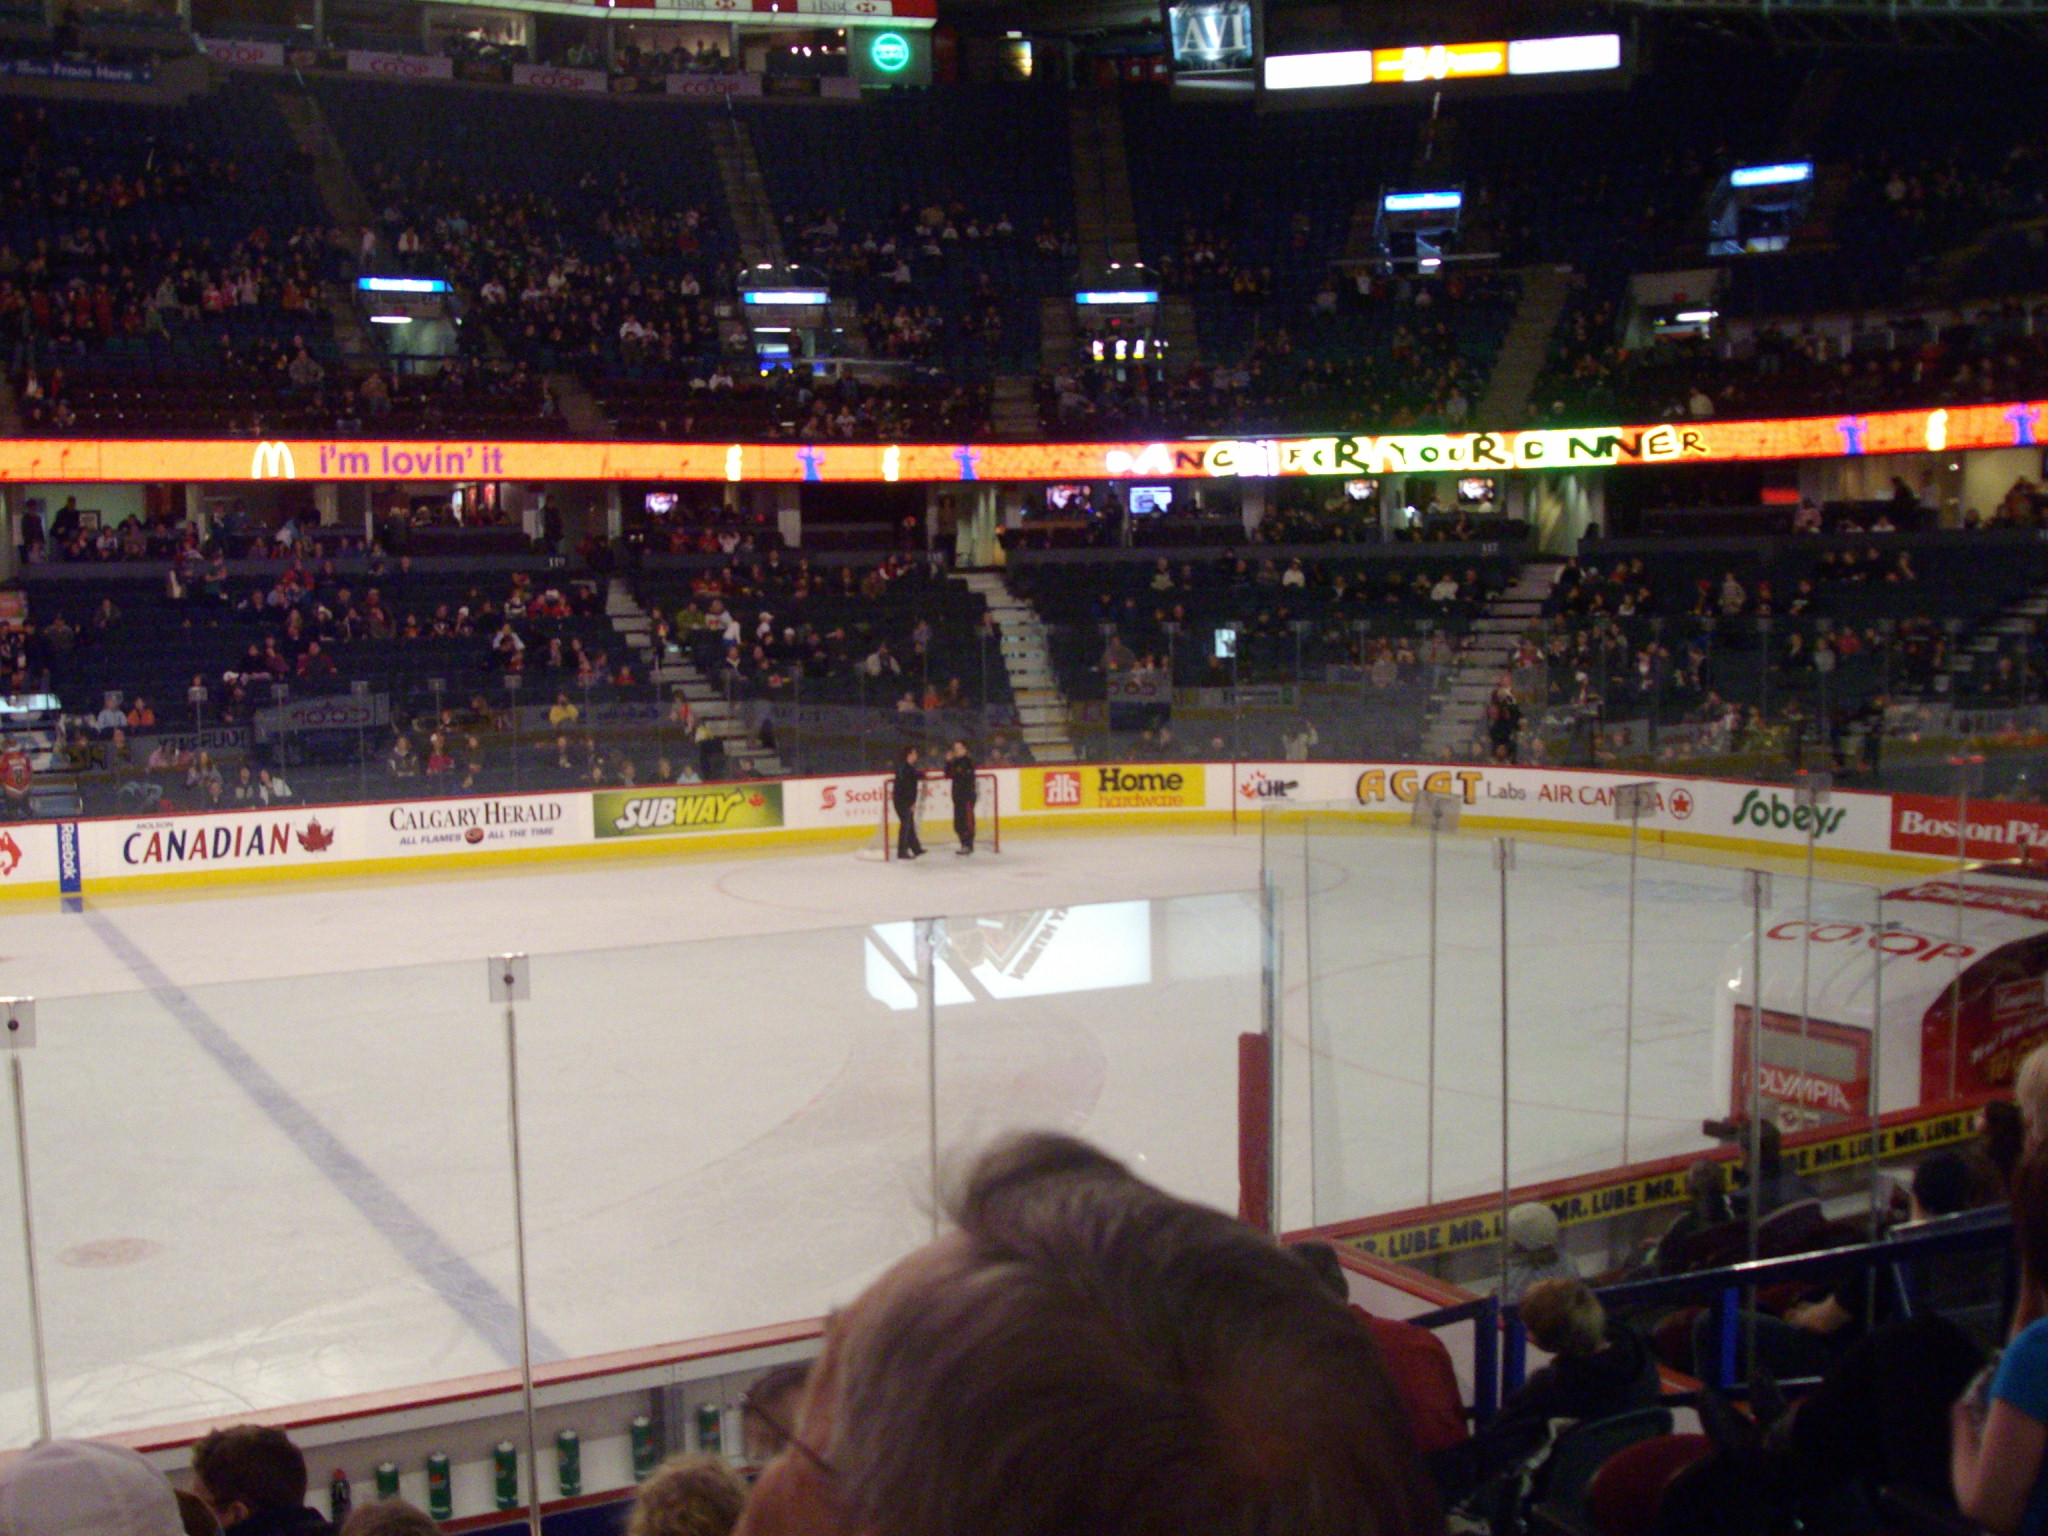 the ice hockey rink is packed with fans